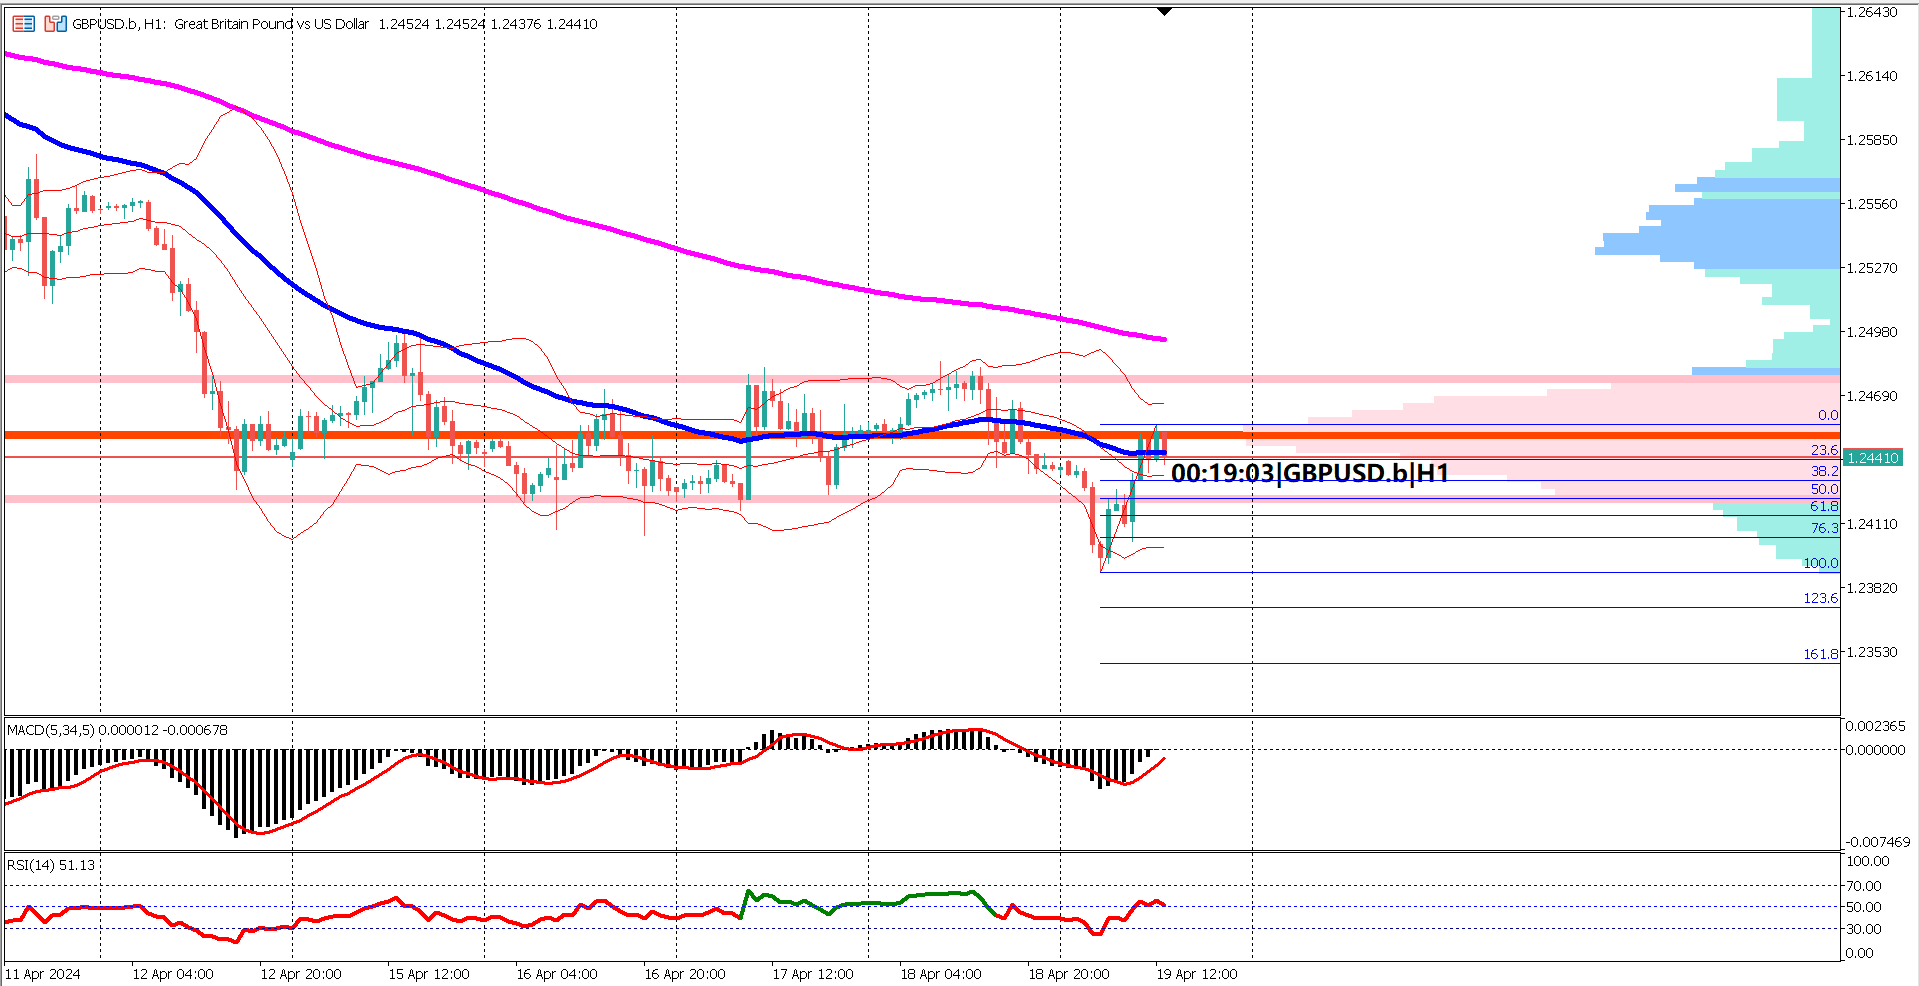 GBPUSD Finds Support at 1.239 Amid Bearish Sentiment